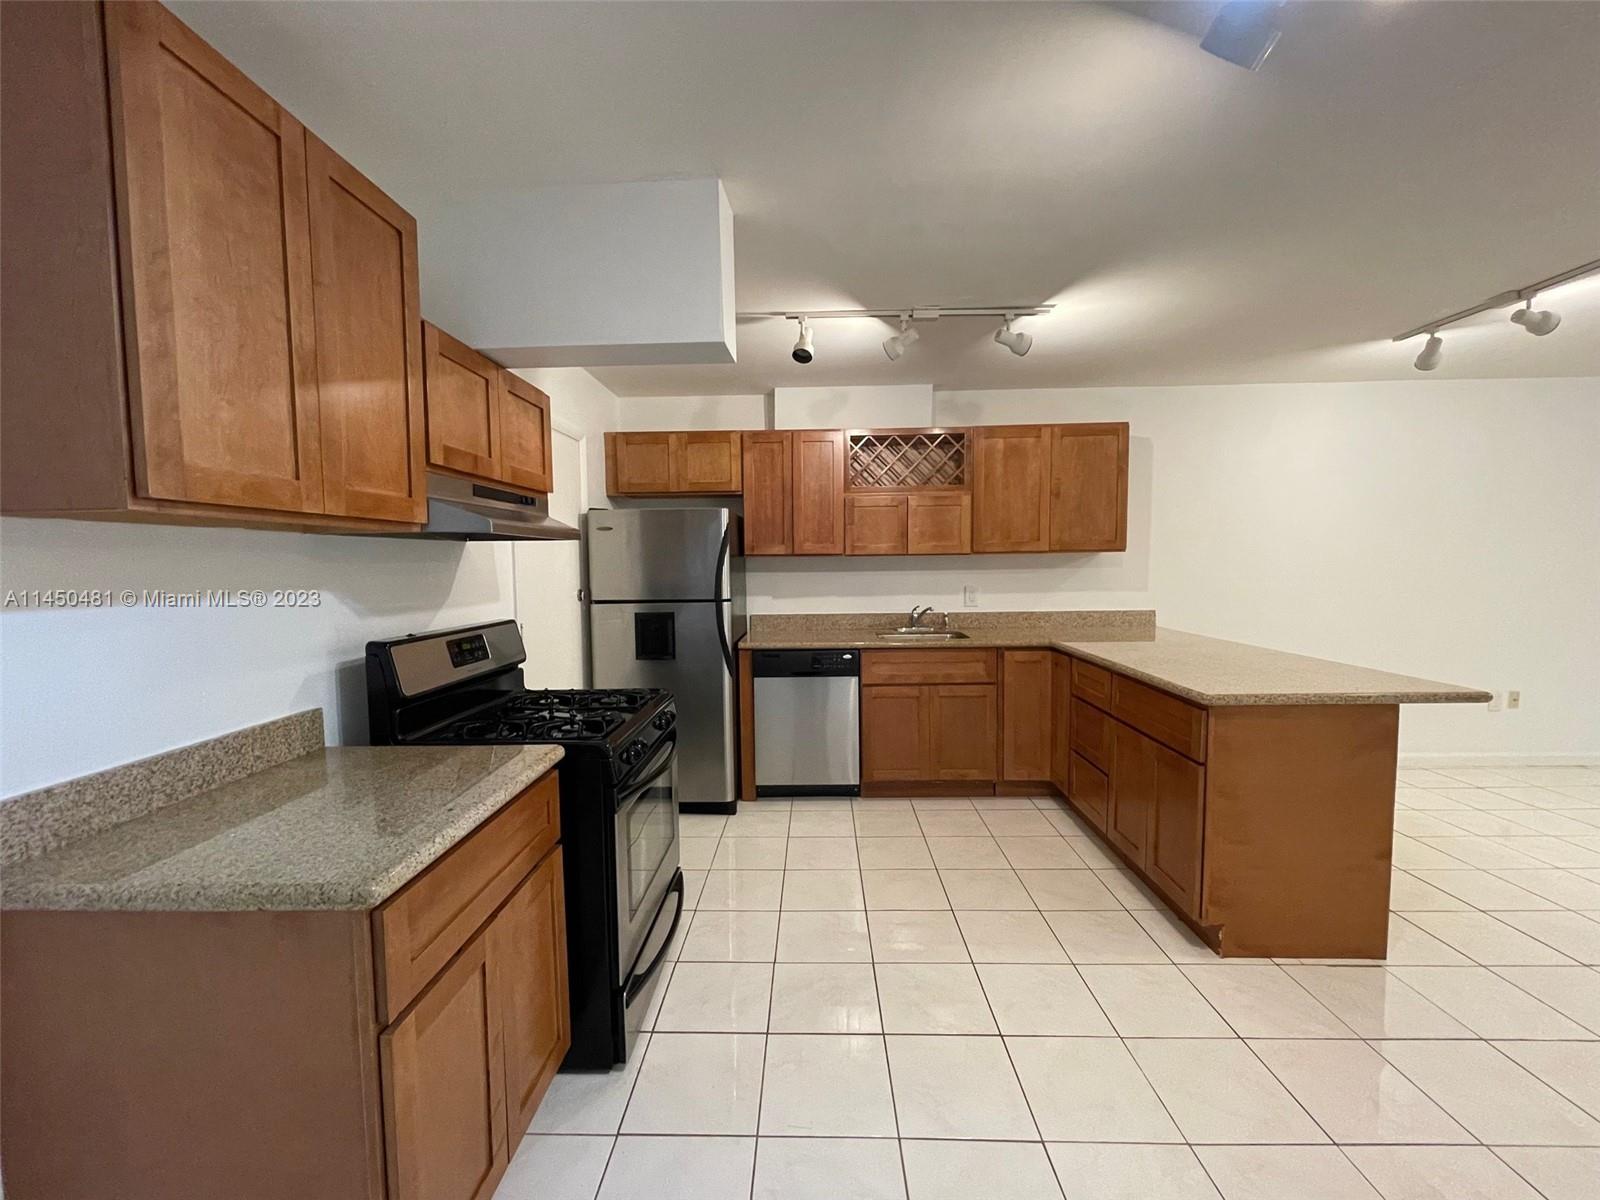 FIRST FLOOR 1/1 CONDO WITH OPEN KITCHEN, WOOD CABINETS, GRANITE COUNTER TOP, STAINLESS STEEL APPLIANCES WHICH INCLUDES GAS STOVE TOP. PRIVATE PATIO LEADS TO COMMUNITY POOL. LAUNDRY FACILITIES WIHTIN BUILDING. LOCATED IN THE PINECREST SCHOOL DISTRICT. WALKING DISTANCE TO METRORAIL, TRANSPORTATION, DADELAND MALL (SHOPS & DINING) & DADELAND METRORAIL STATION.